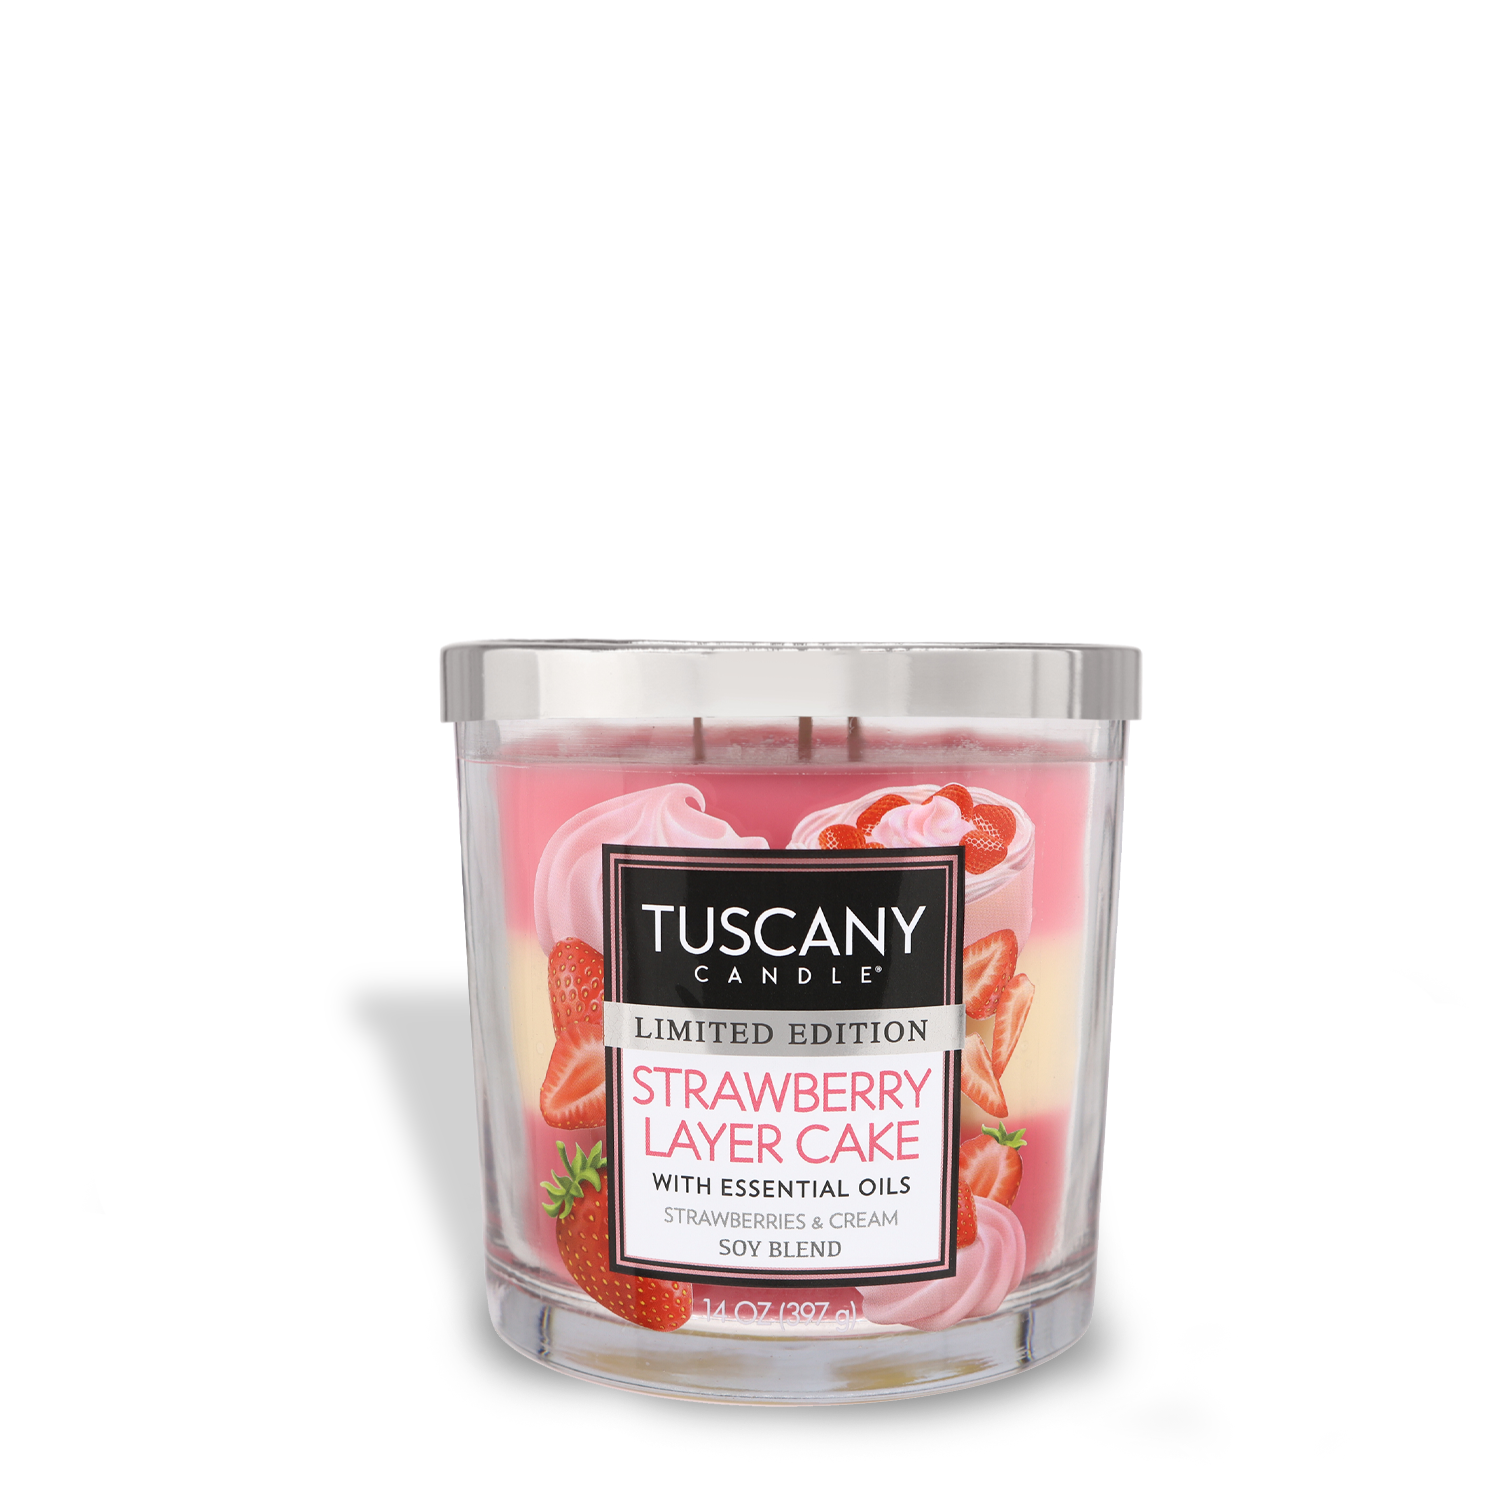 Tuscany Candle® SEASONAL Strawberry Layer Cake Long-Lasting Scented Jar Candle (14 oz) with cherry blossom essential oils.